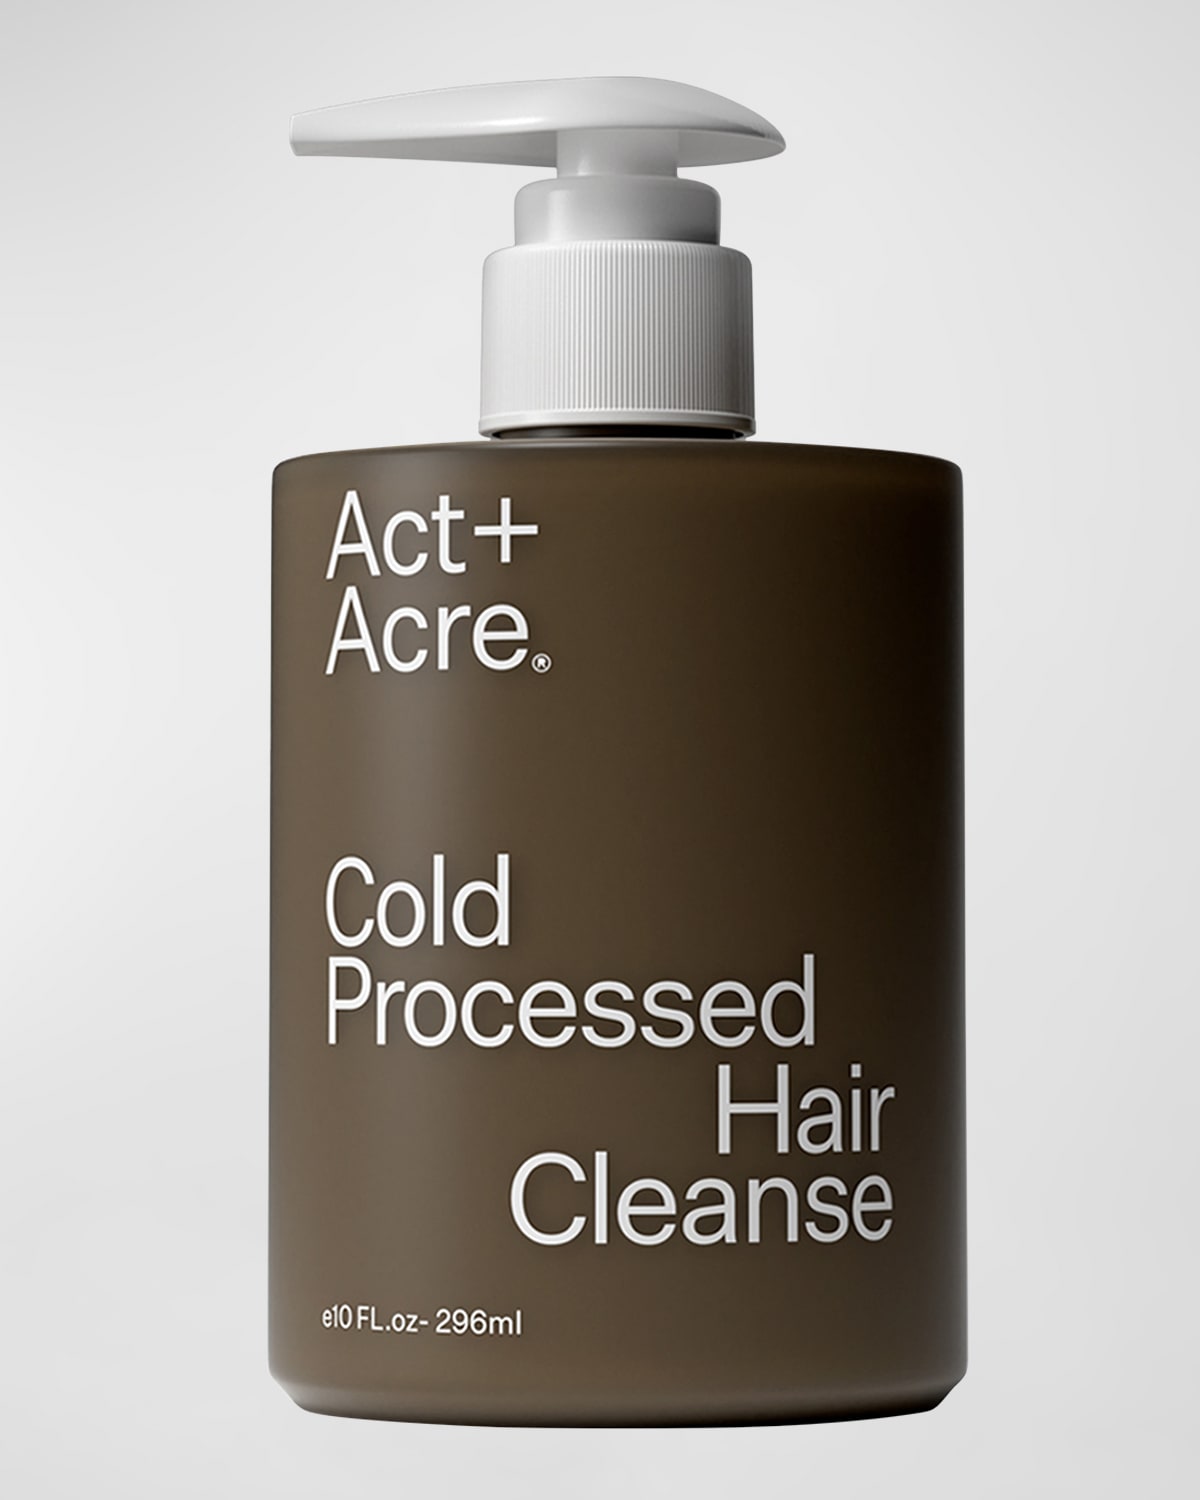 Cold Processed Hair Cleanse